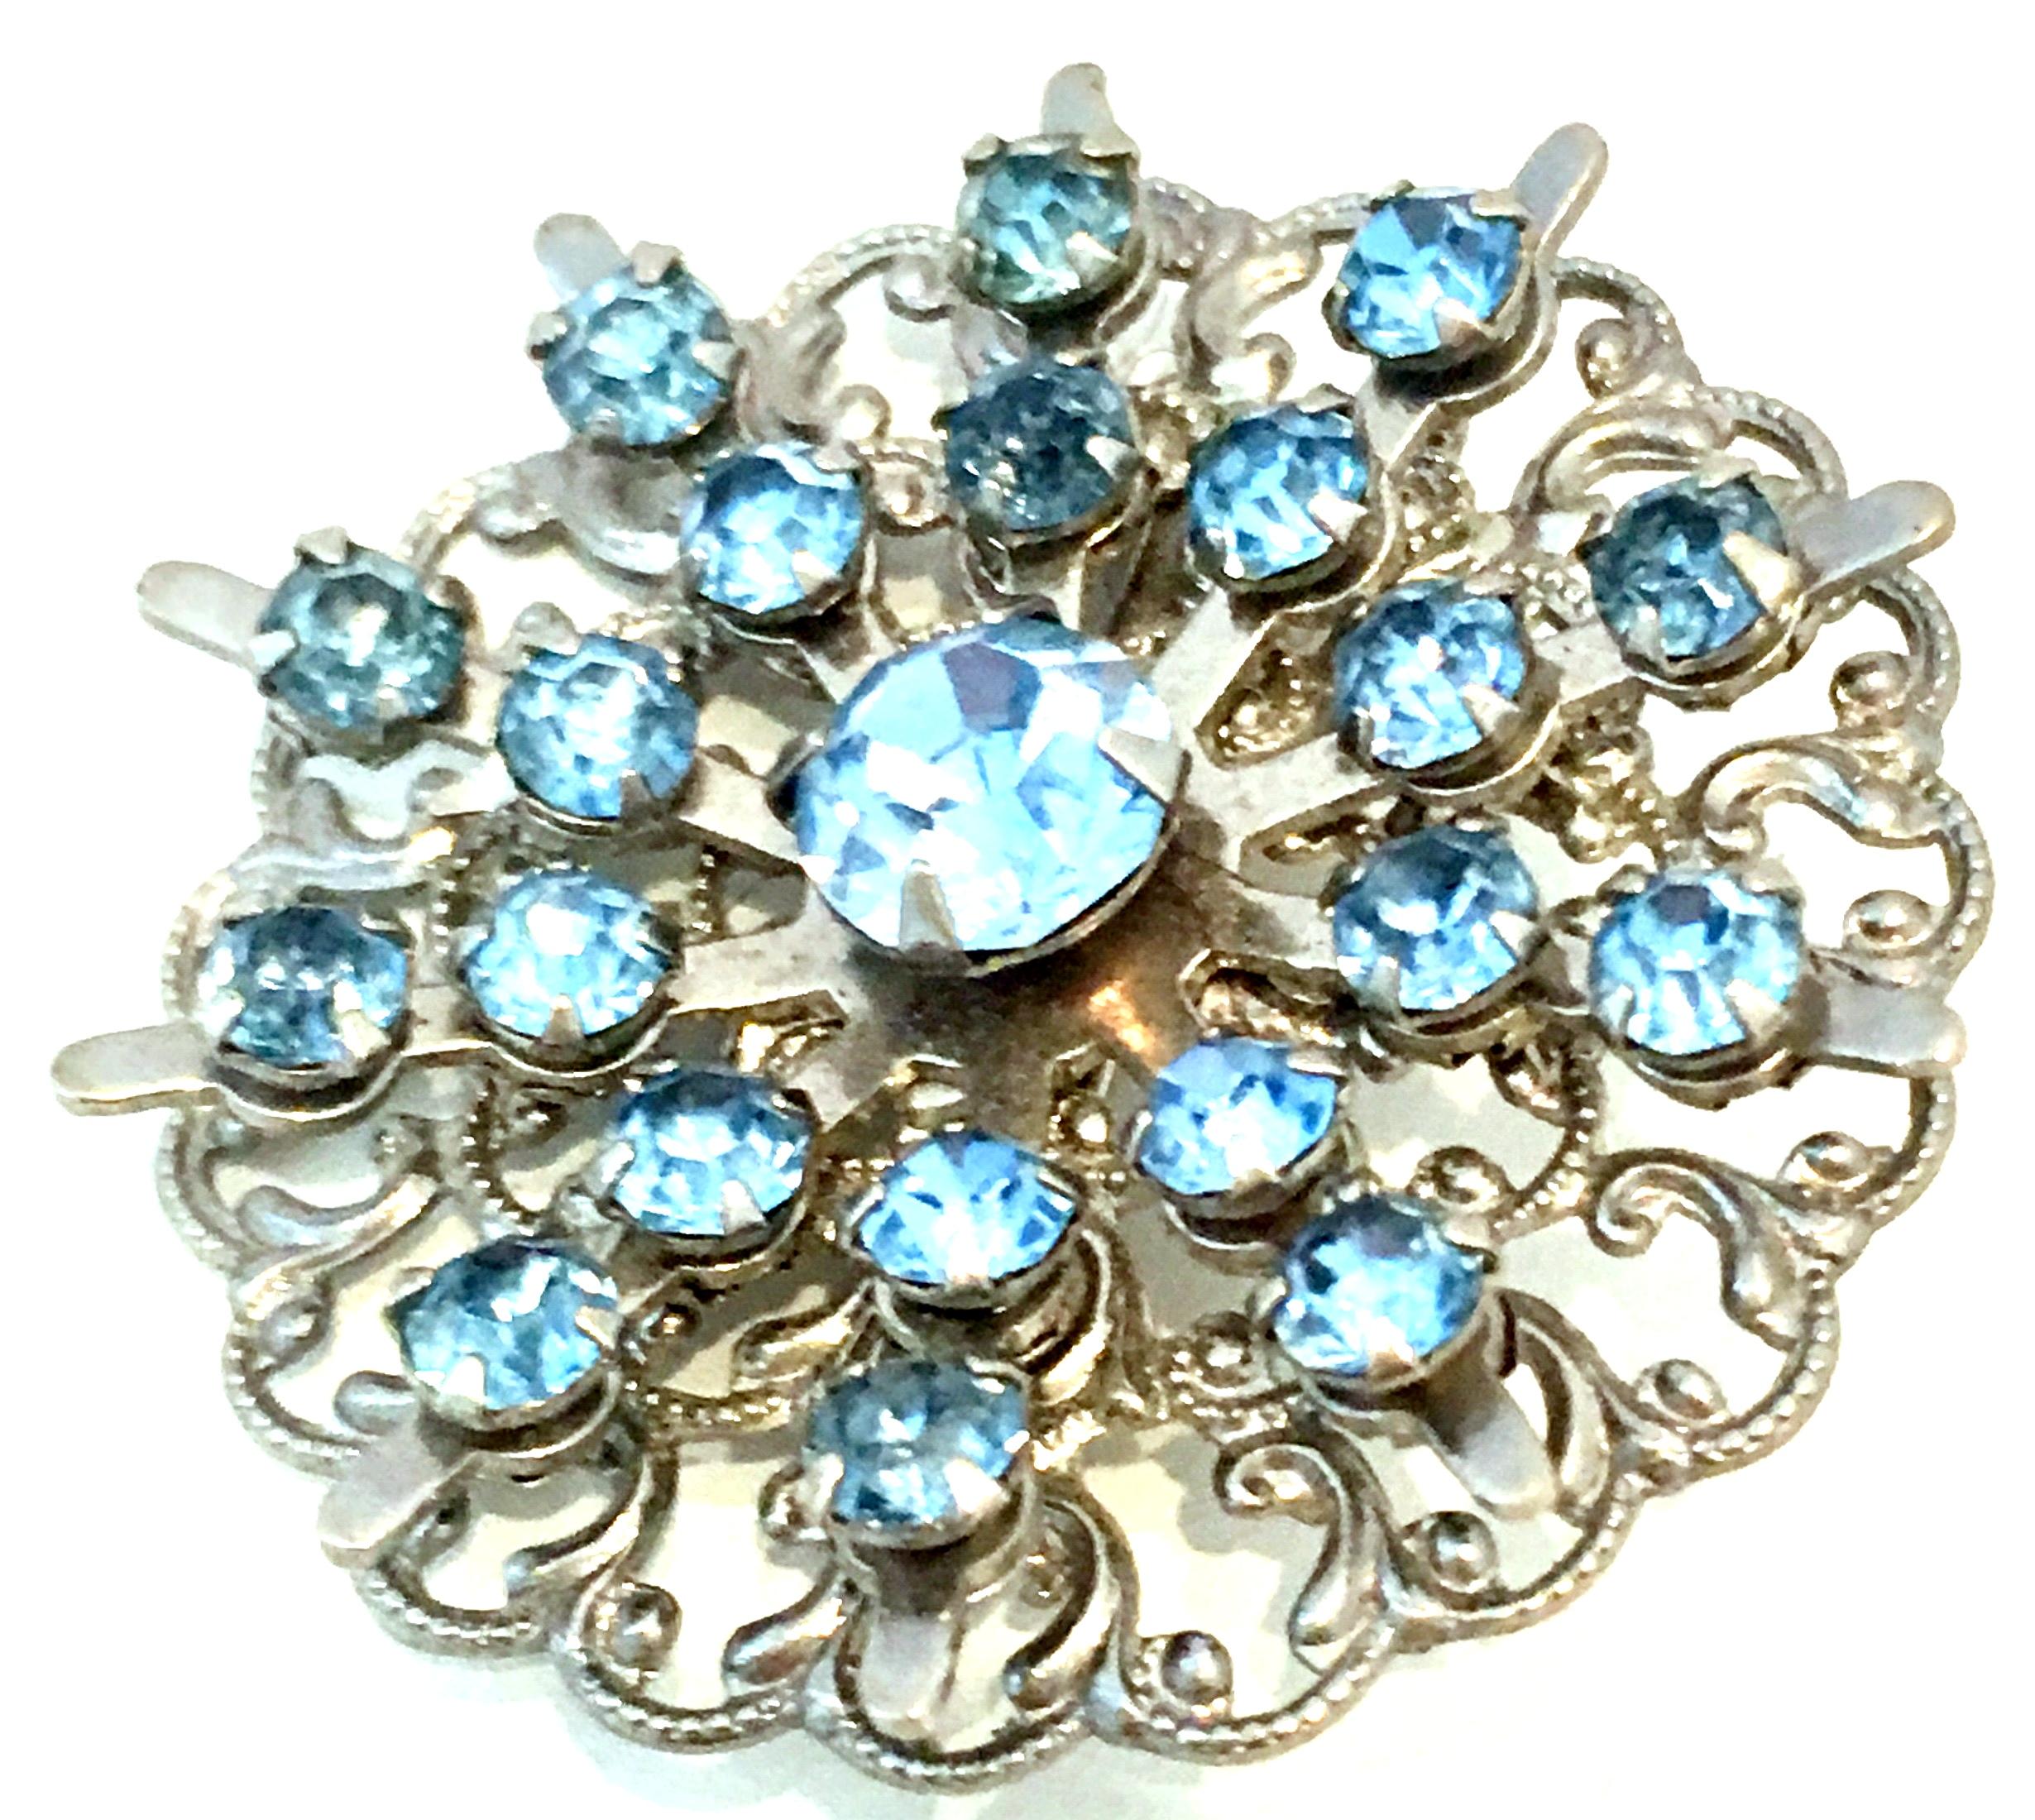 Mid-20th Century Sterling Silver & Austrian Crystal Dimensional Brooch. This unique dimensional brooch features stamped and filigree sterling silver with brilliant cut and faceted fancy prong set sapphire blue Austrian crystals. The large center